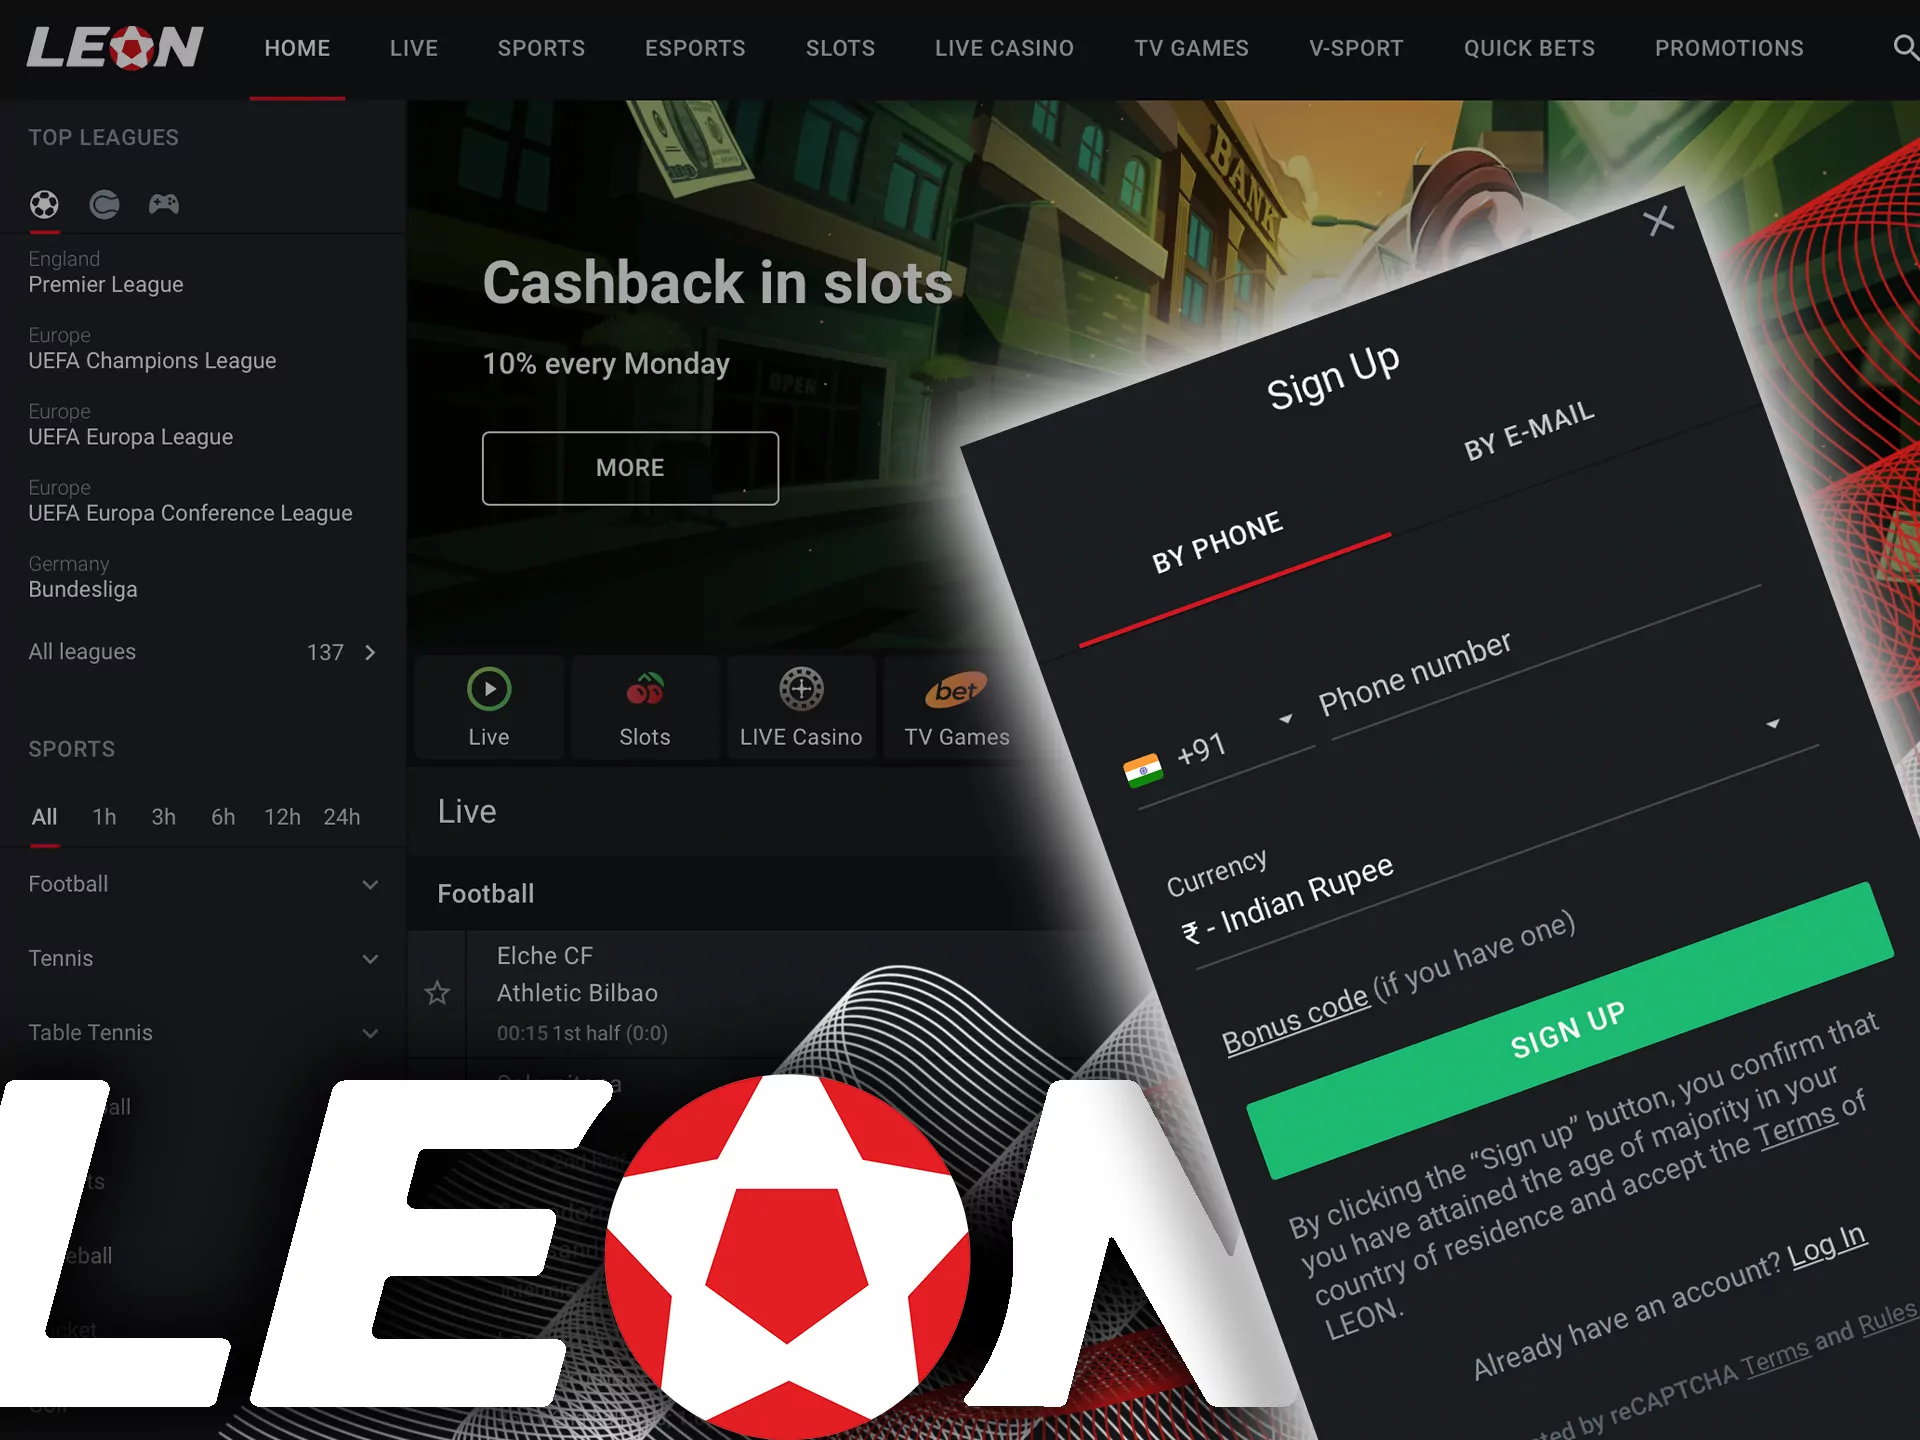 Create an account to dive into the betting world in Leon.